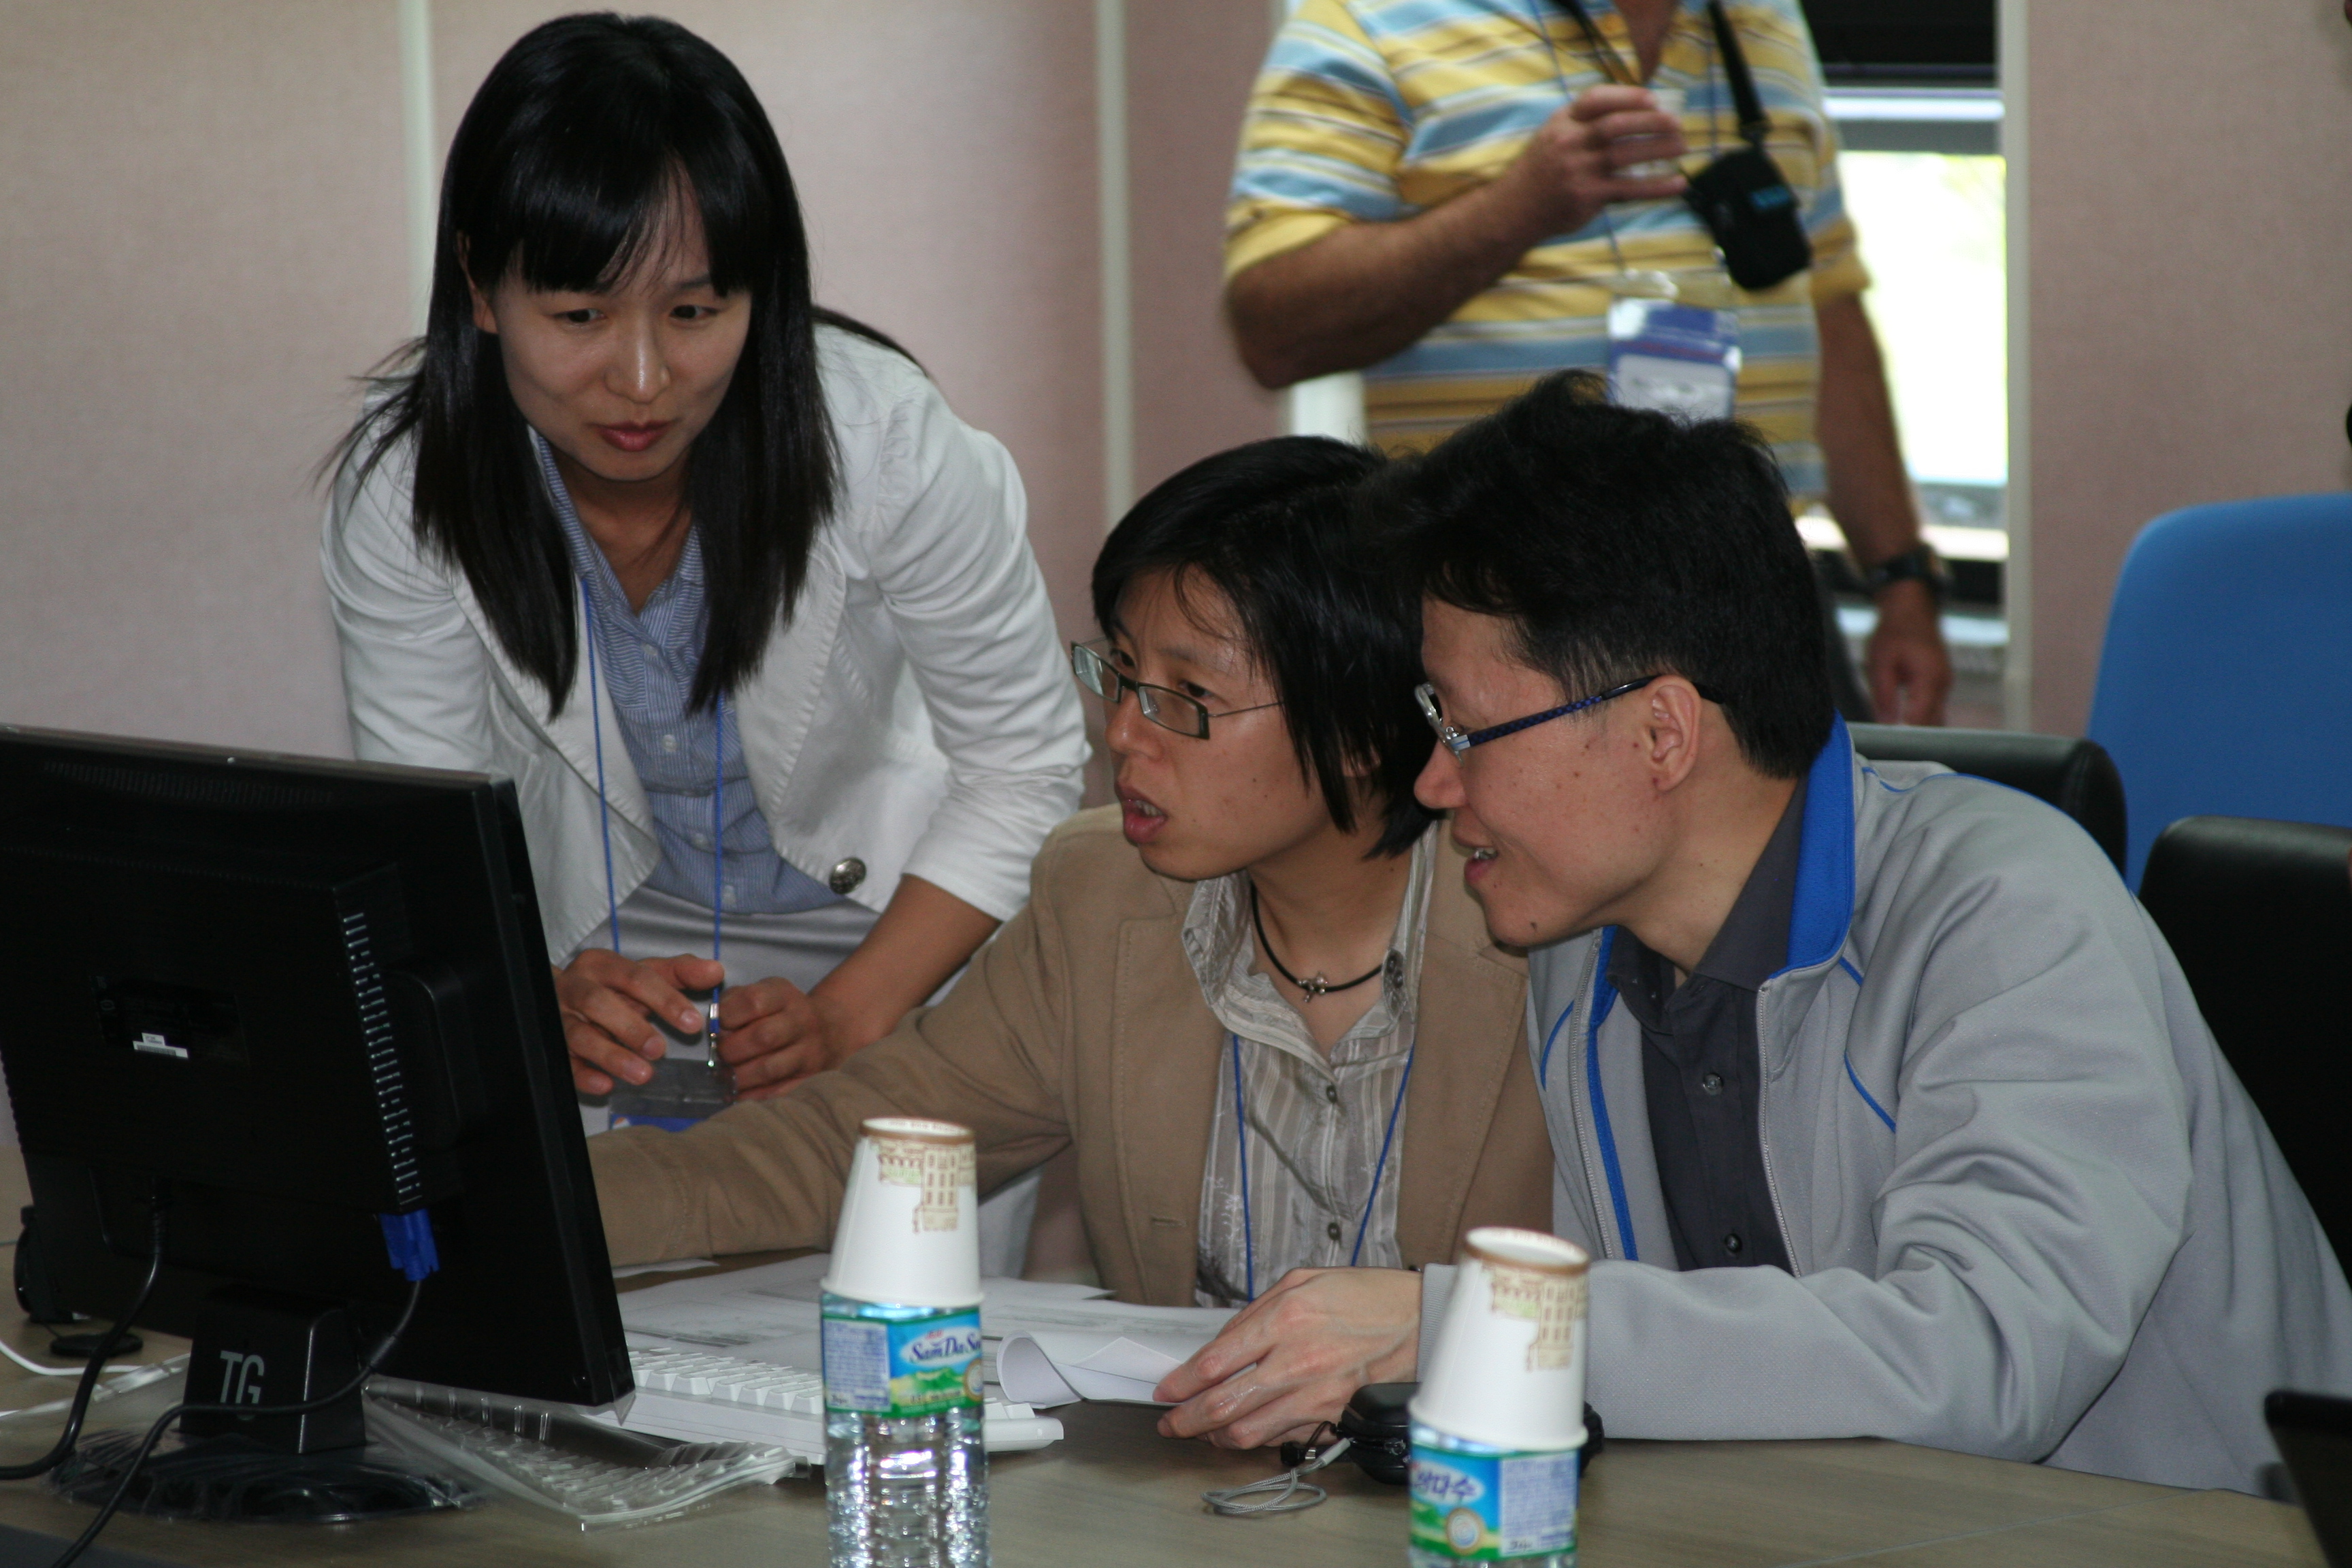 Ms. Li Yuet-Sim and Mr. Wong Chau-Ping (seated) working with KMA instructor during a demonstration session at the Korea National Typhoon Center in Jeju.